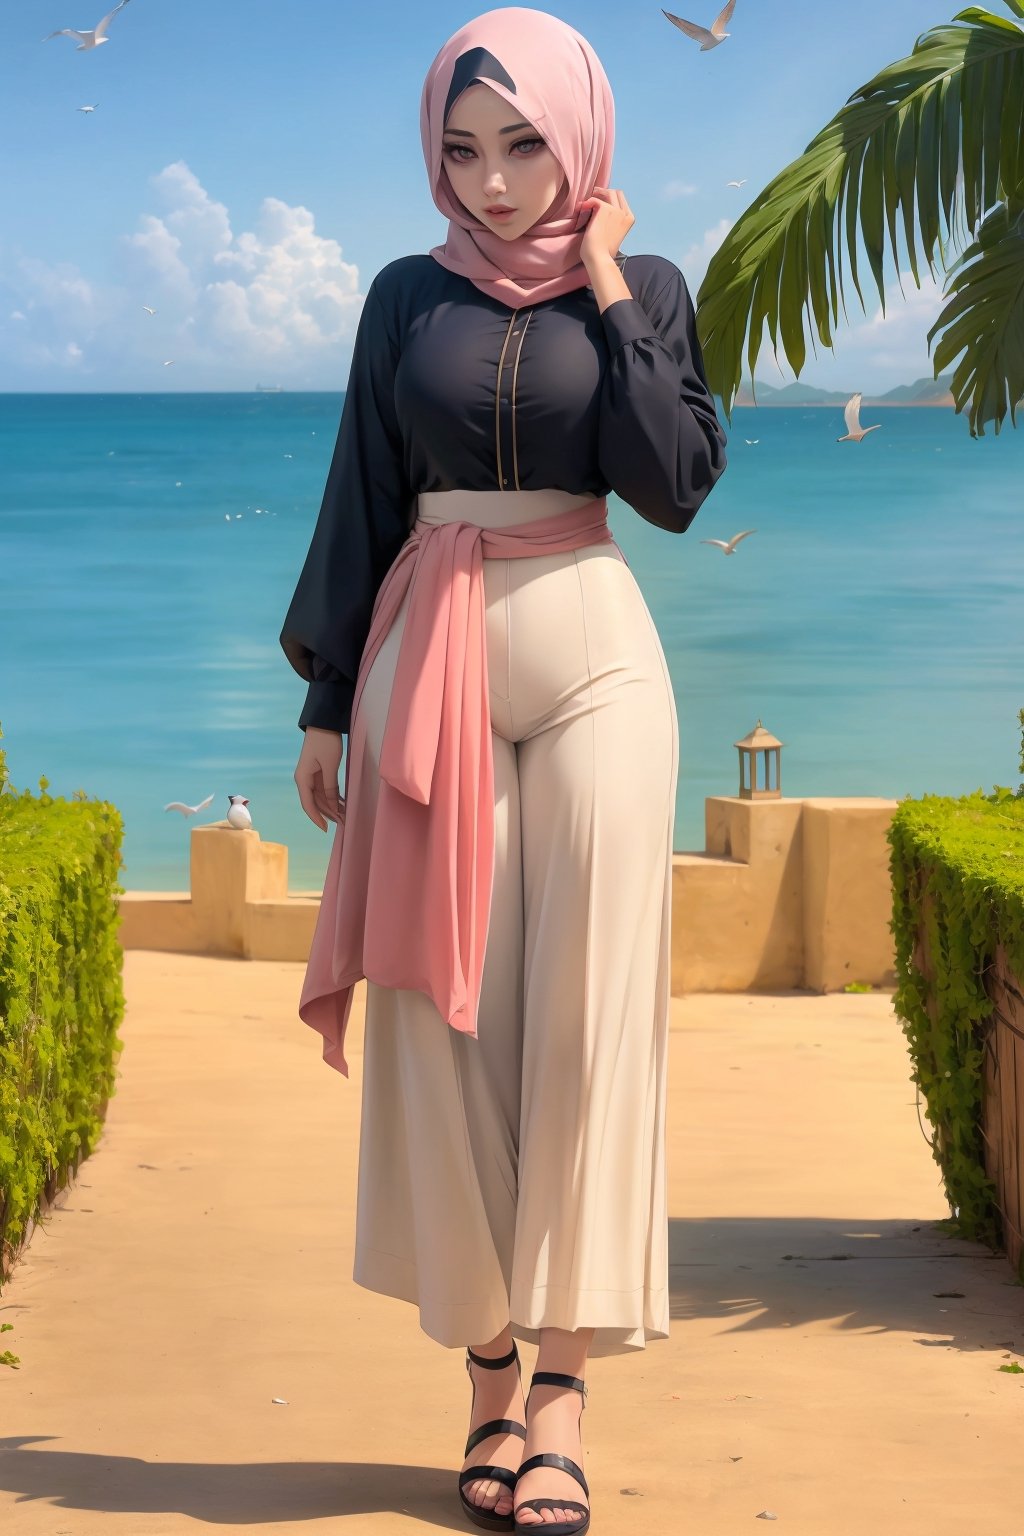 Woman(slim body, young, pink eyes, arab, morrocan, eyelashes, hijab, Wearing a white headscarf and veill,Gorgeous abaya, arabian pants Arabian, feminine, beautiful), (full body), Staring at you while reporting news at news stage, background(outdoor, day, sun, ocean, mosques, birds), (Shot from distance),(masterpiece, highres, high quality:1.2), ambient occlusion, low saturation, High detailed, Detailedface, Dreamscape,perfect